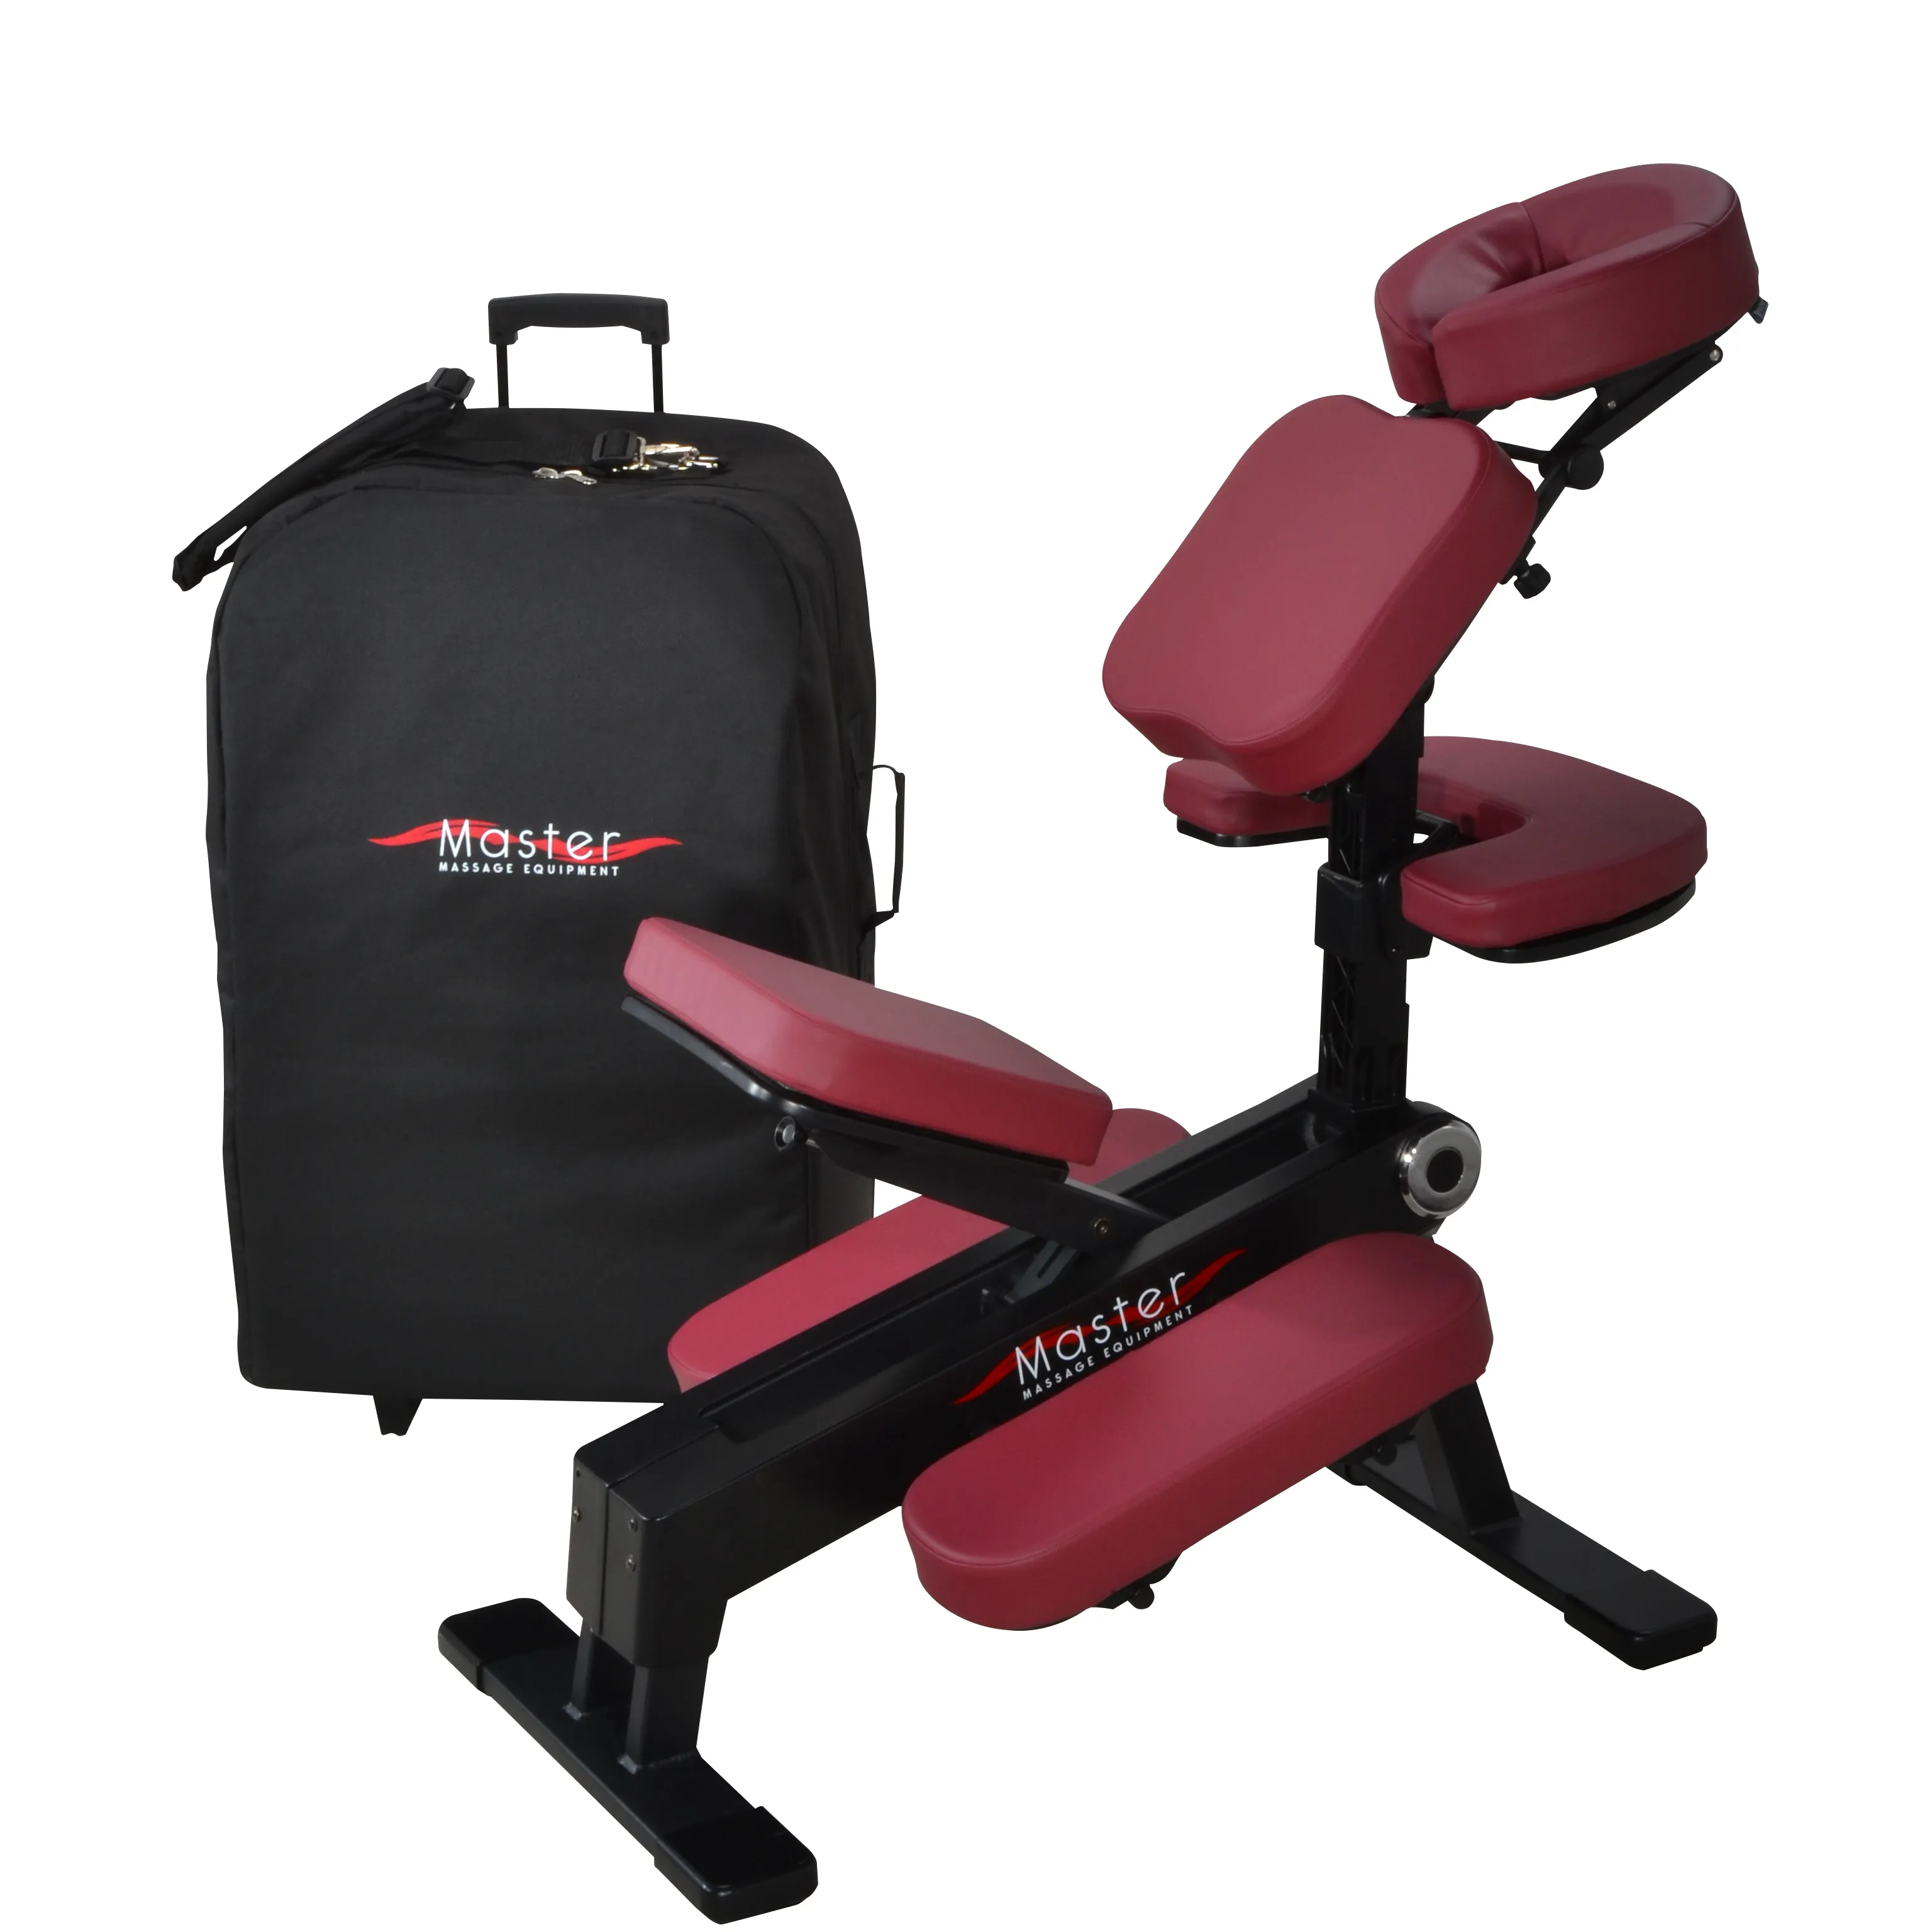 Master Massage Gymlane Factory Custom Metal Stainless Folding Adjustable Tattoo Chair Portable Massage Chairs with Carrying Case